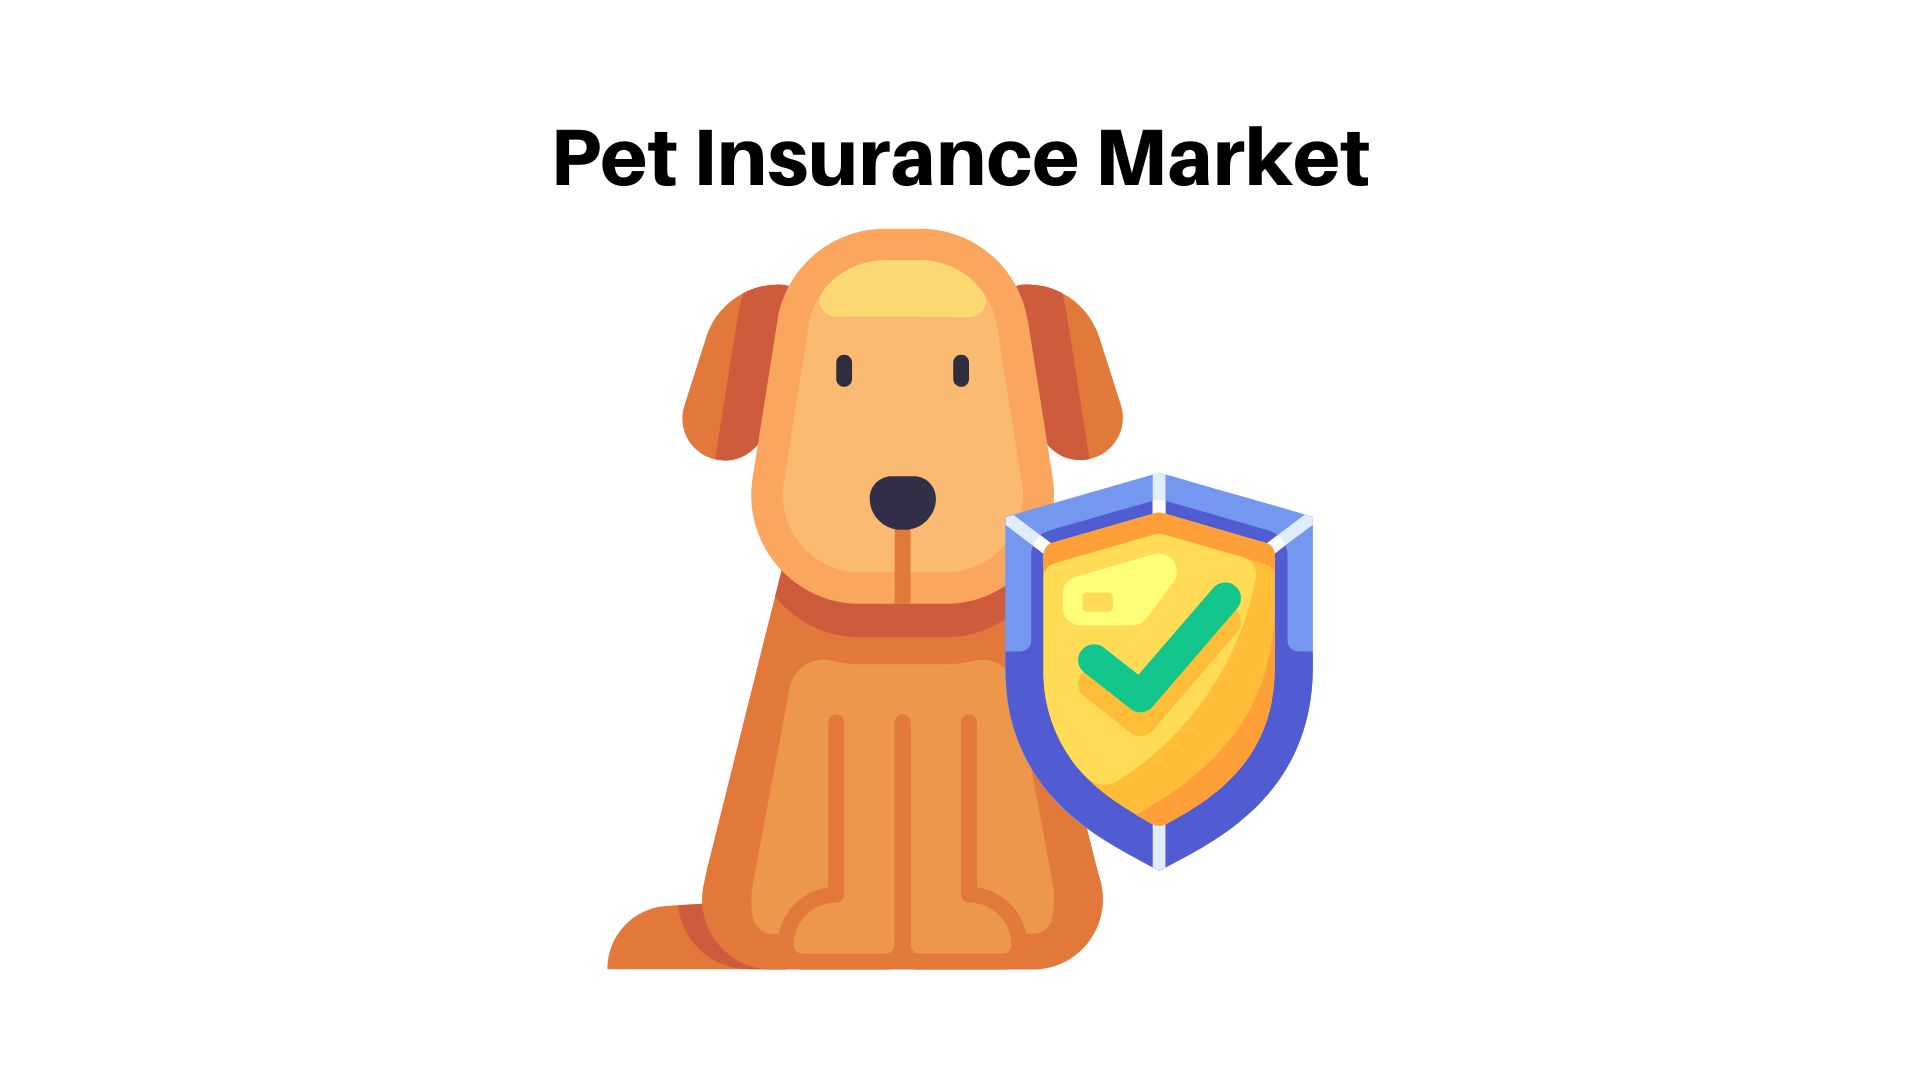 Pet Insurance Market to Offer Numerous Opportunities, Growing at a CAGR of 11.90% through 2032